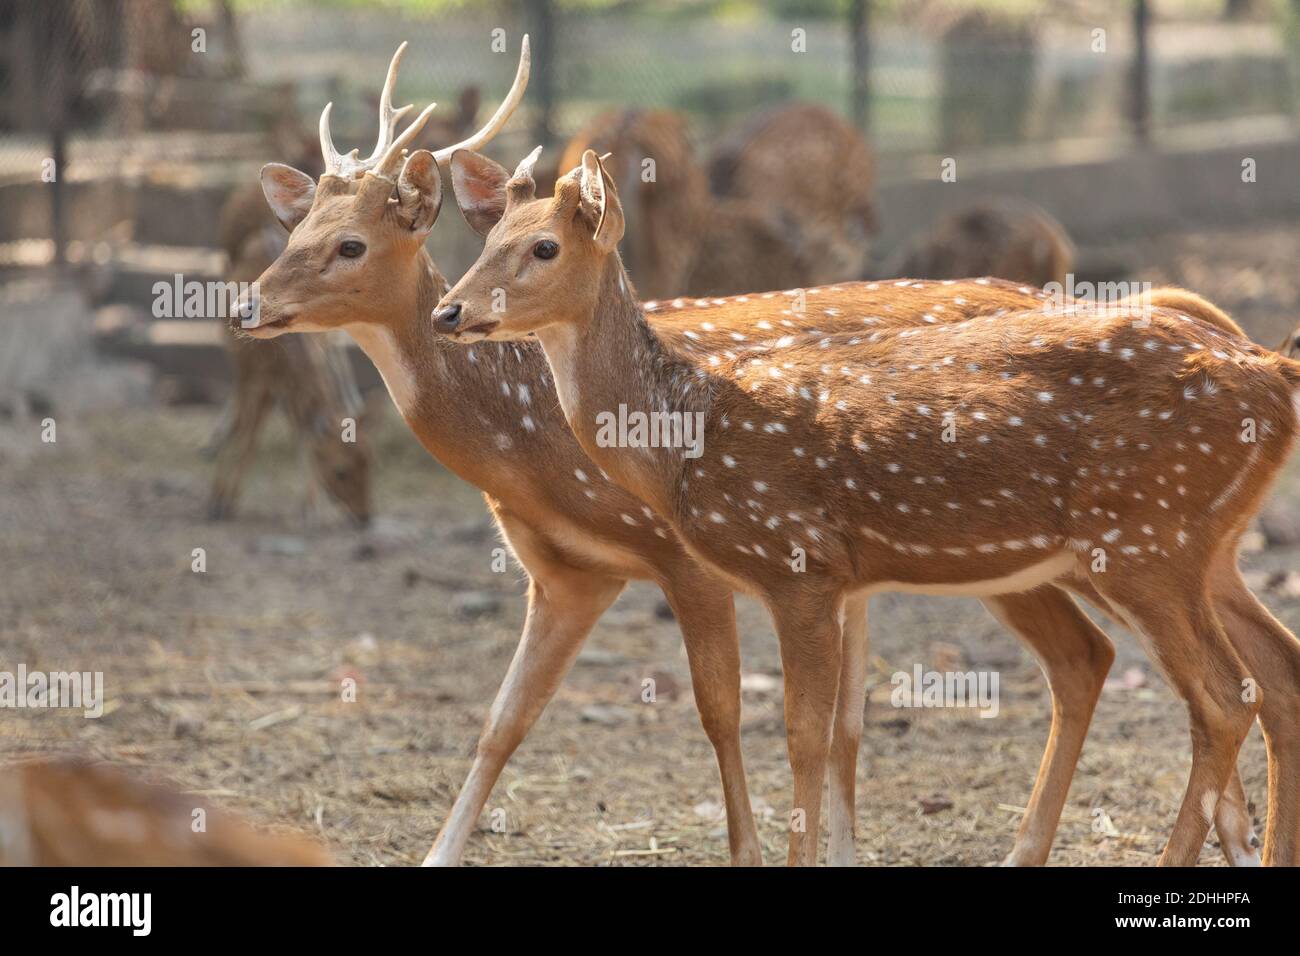 Axis deer herd also known as spotted deer or Chital deer at Indian wildlife reserve Stock Photo